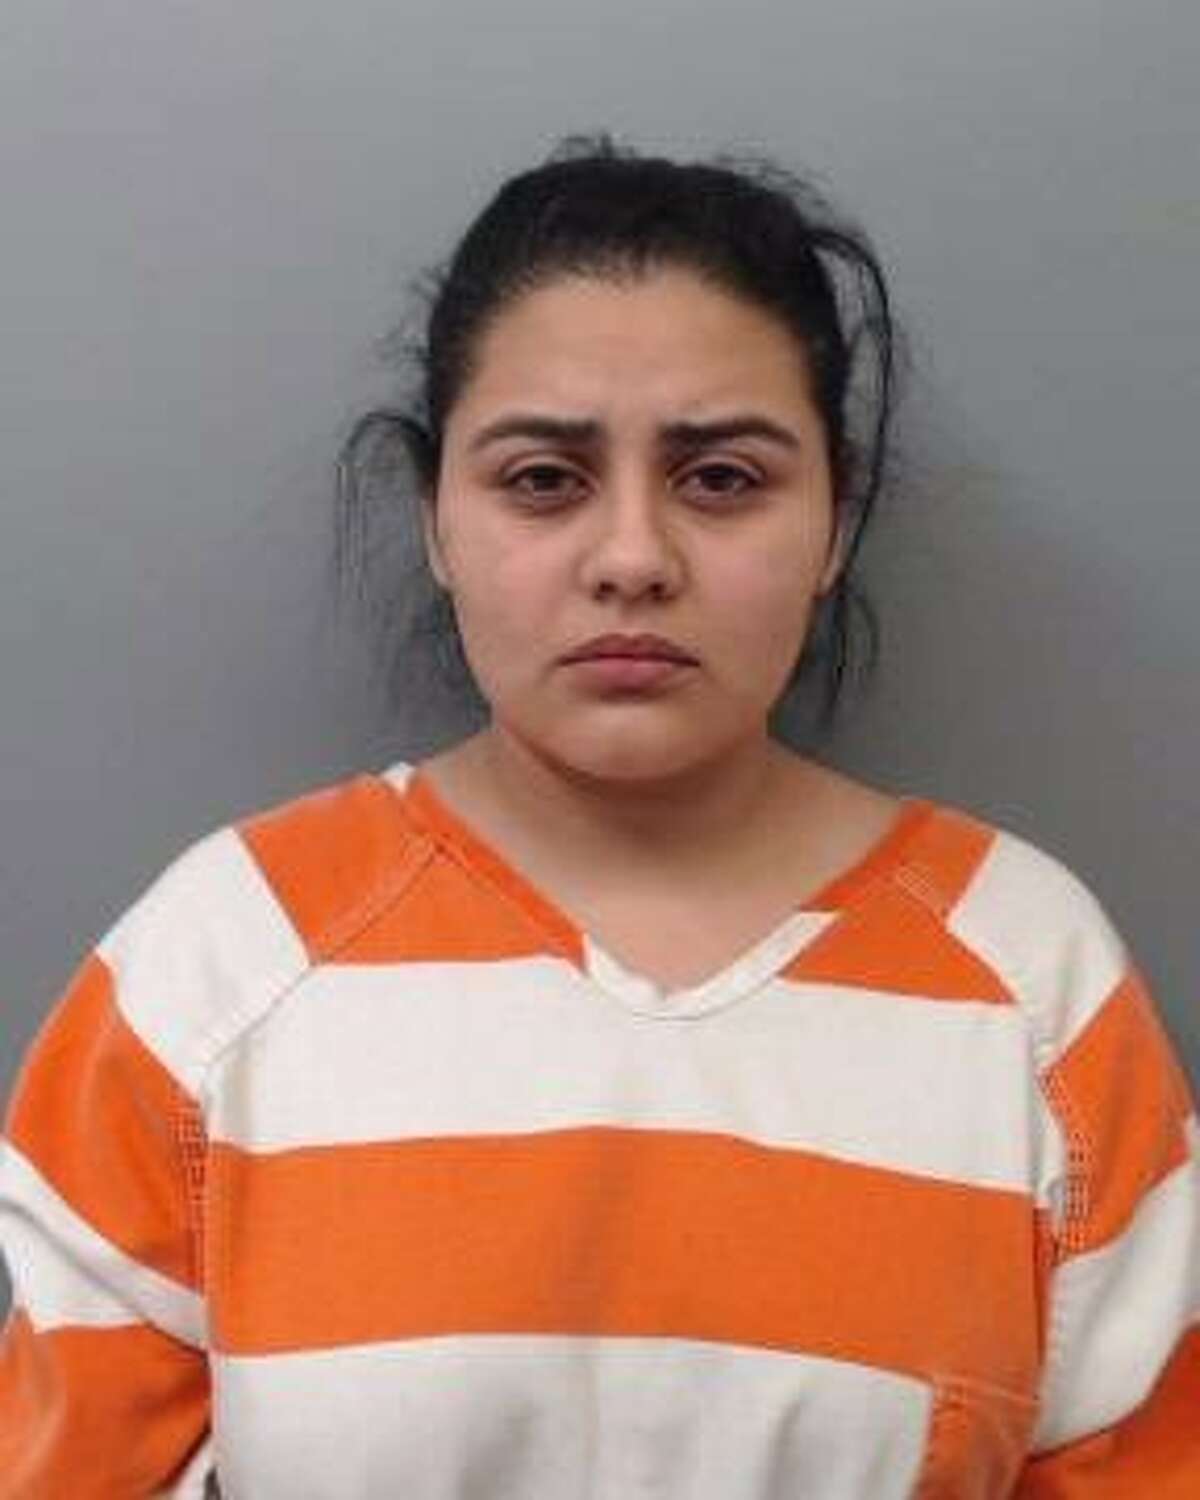 Luz Nallely Herrera, 28, was arrested and charged with reckless driving in the 10000 block of Frontage Road.